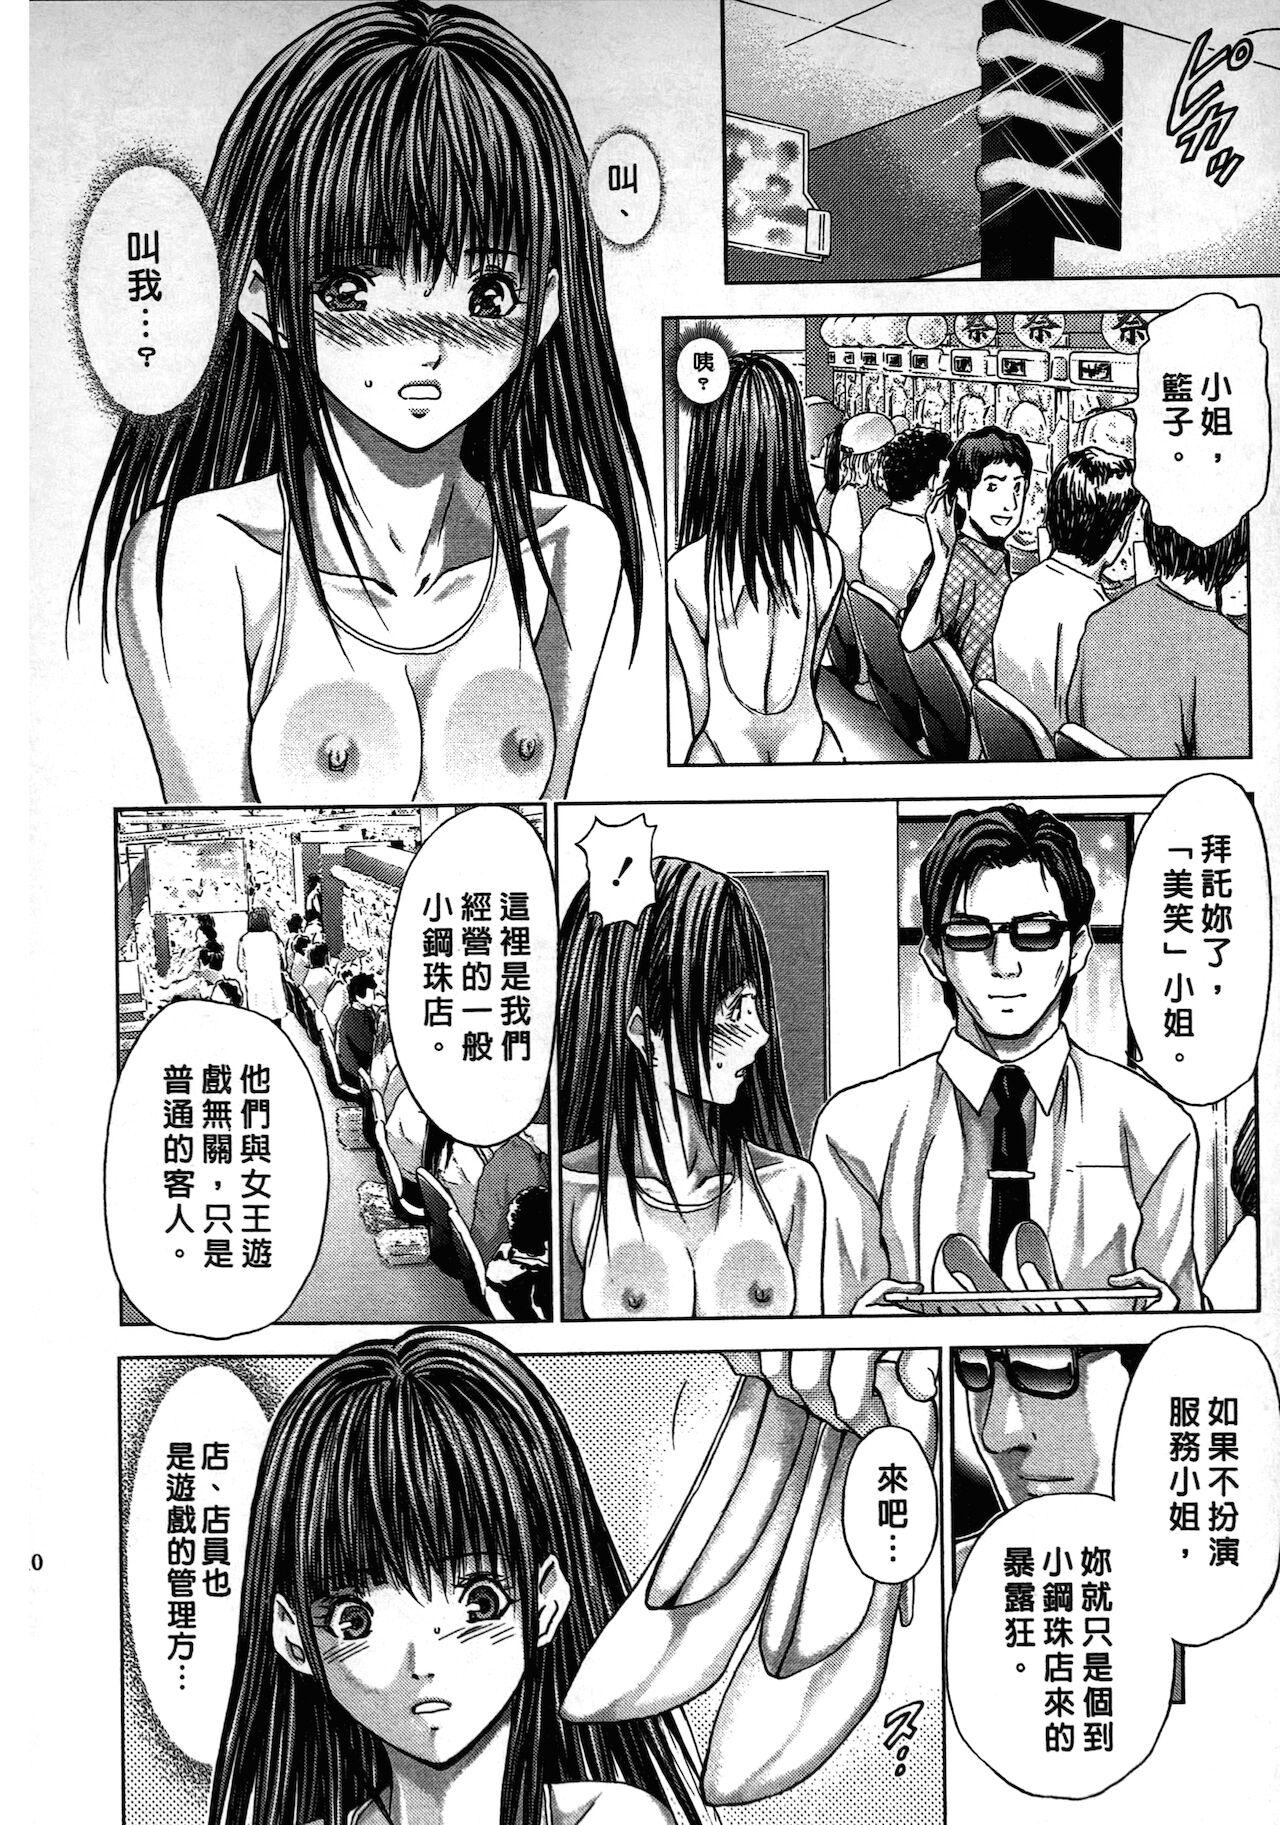 Mama [Adachi Takumi] Queen's Game ~Haitoku no Mysterious Game~ 2 | 女王遊戲 ~背德的詭譎遊戲~ 2 [Chinese] Neighbor - Page 10